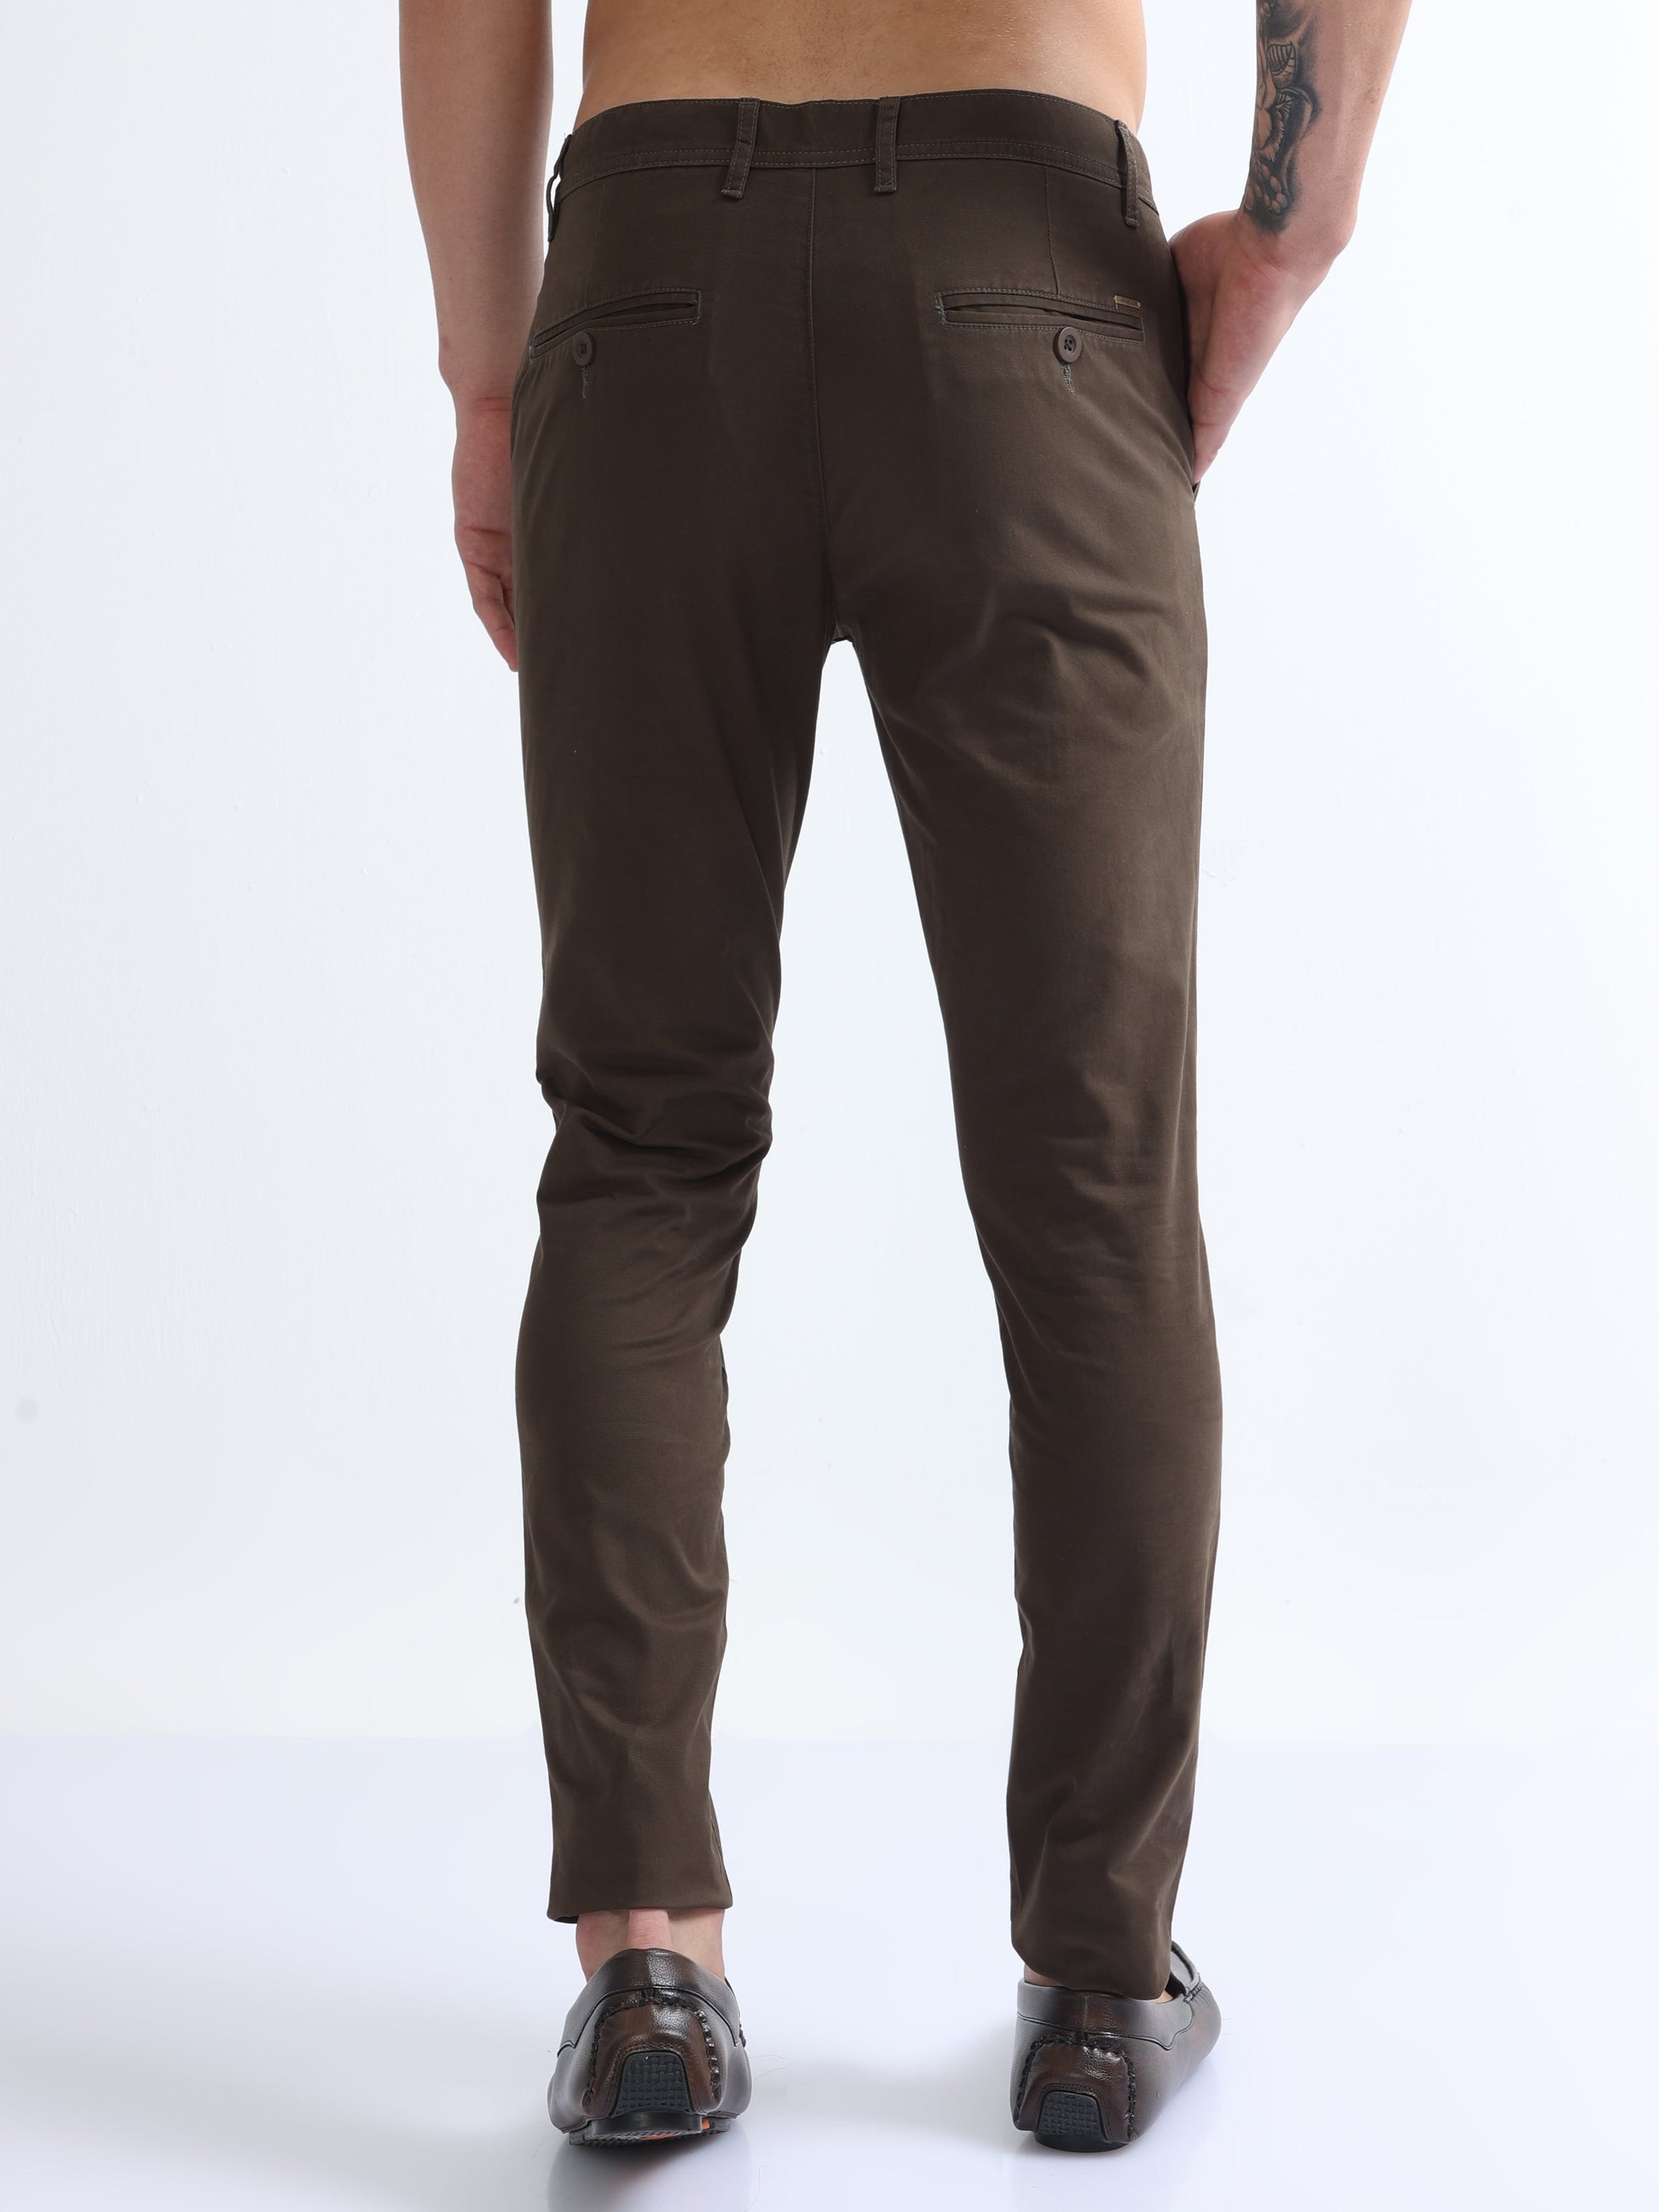 Olive Men's Cotton Twill Stretch Trousers